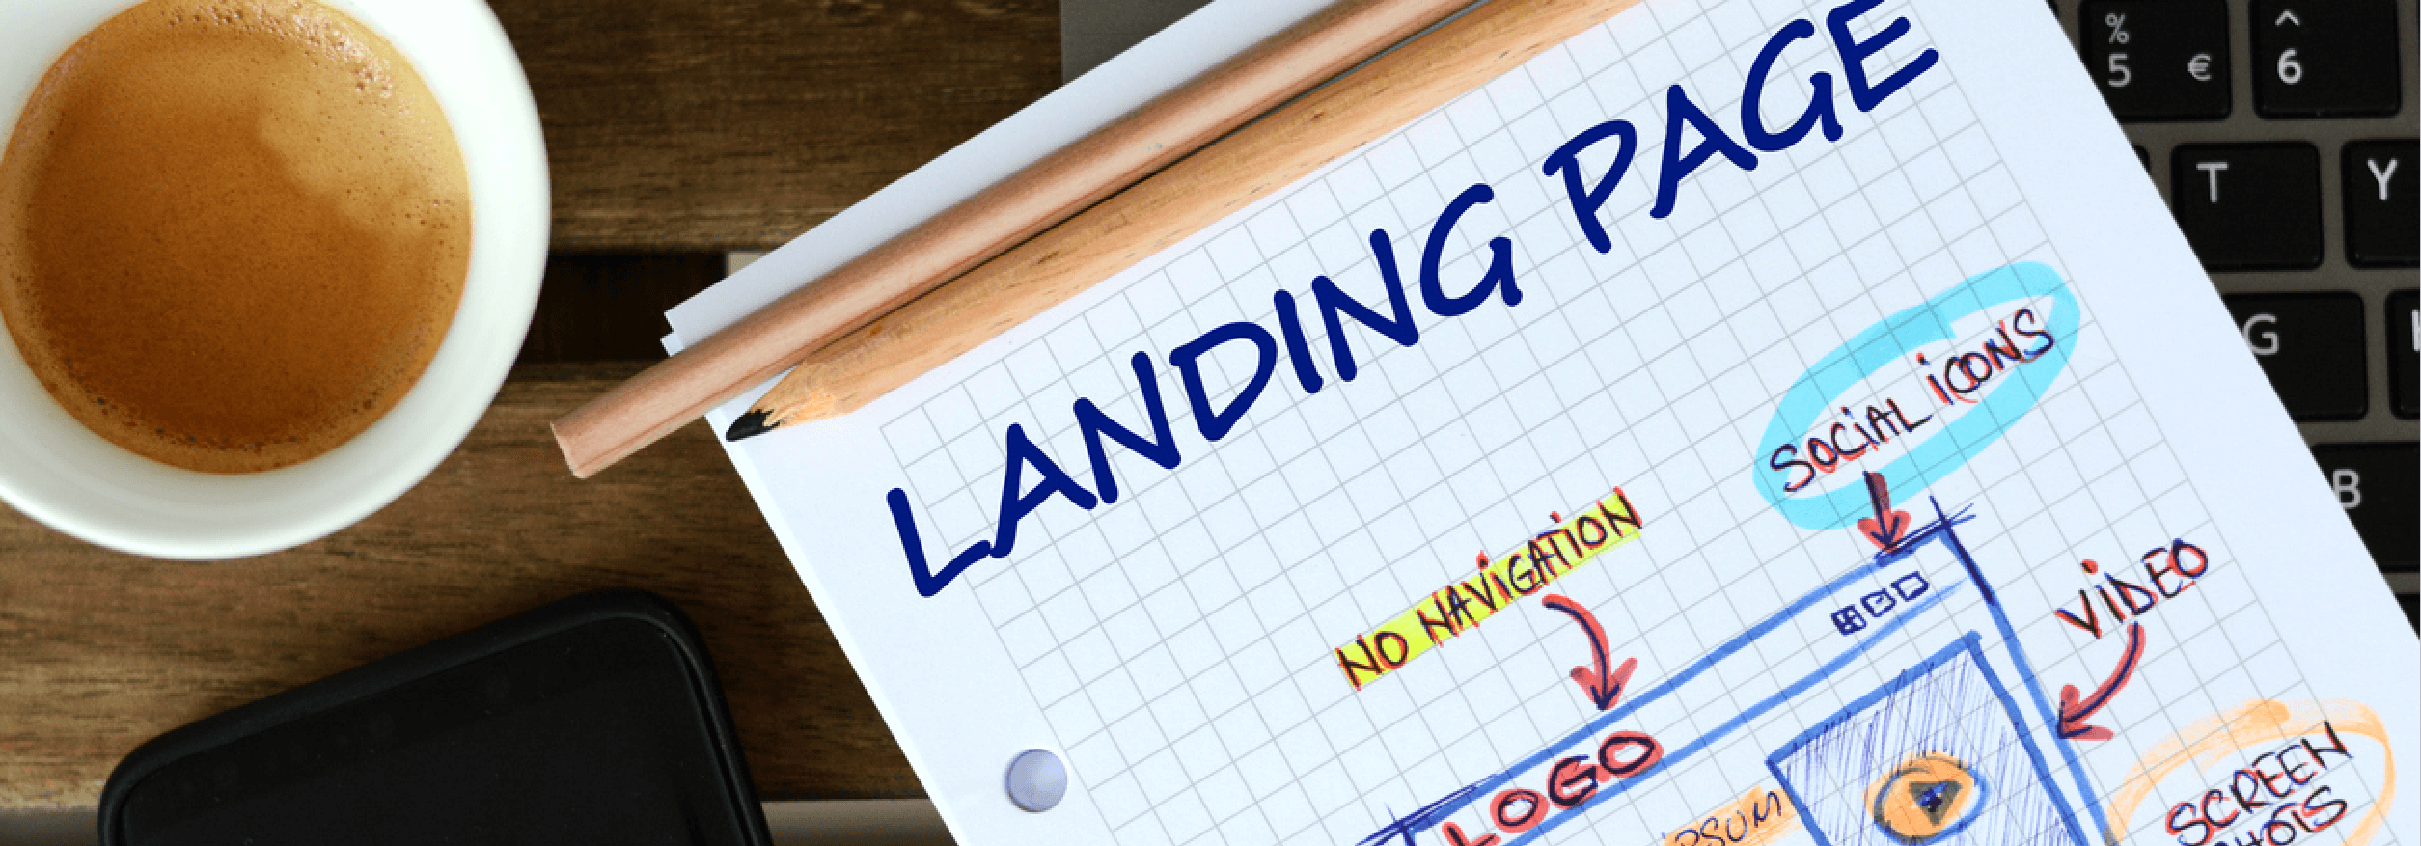 What Are the Key Components of a Landing Page?